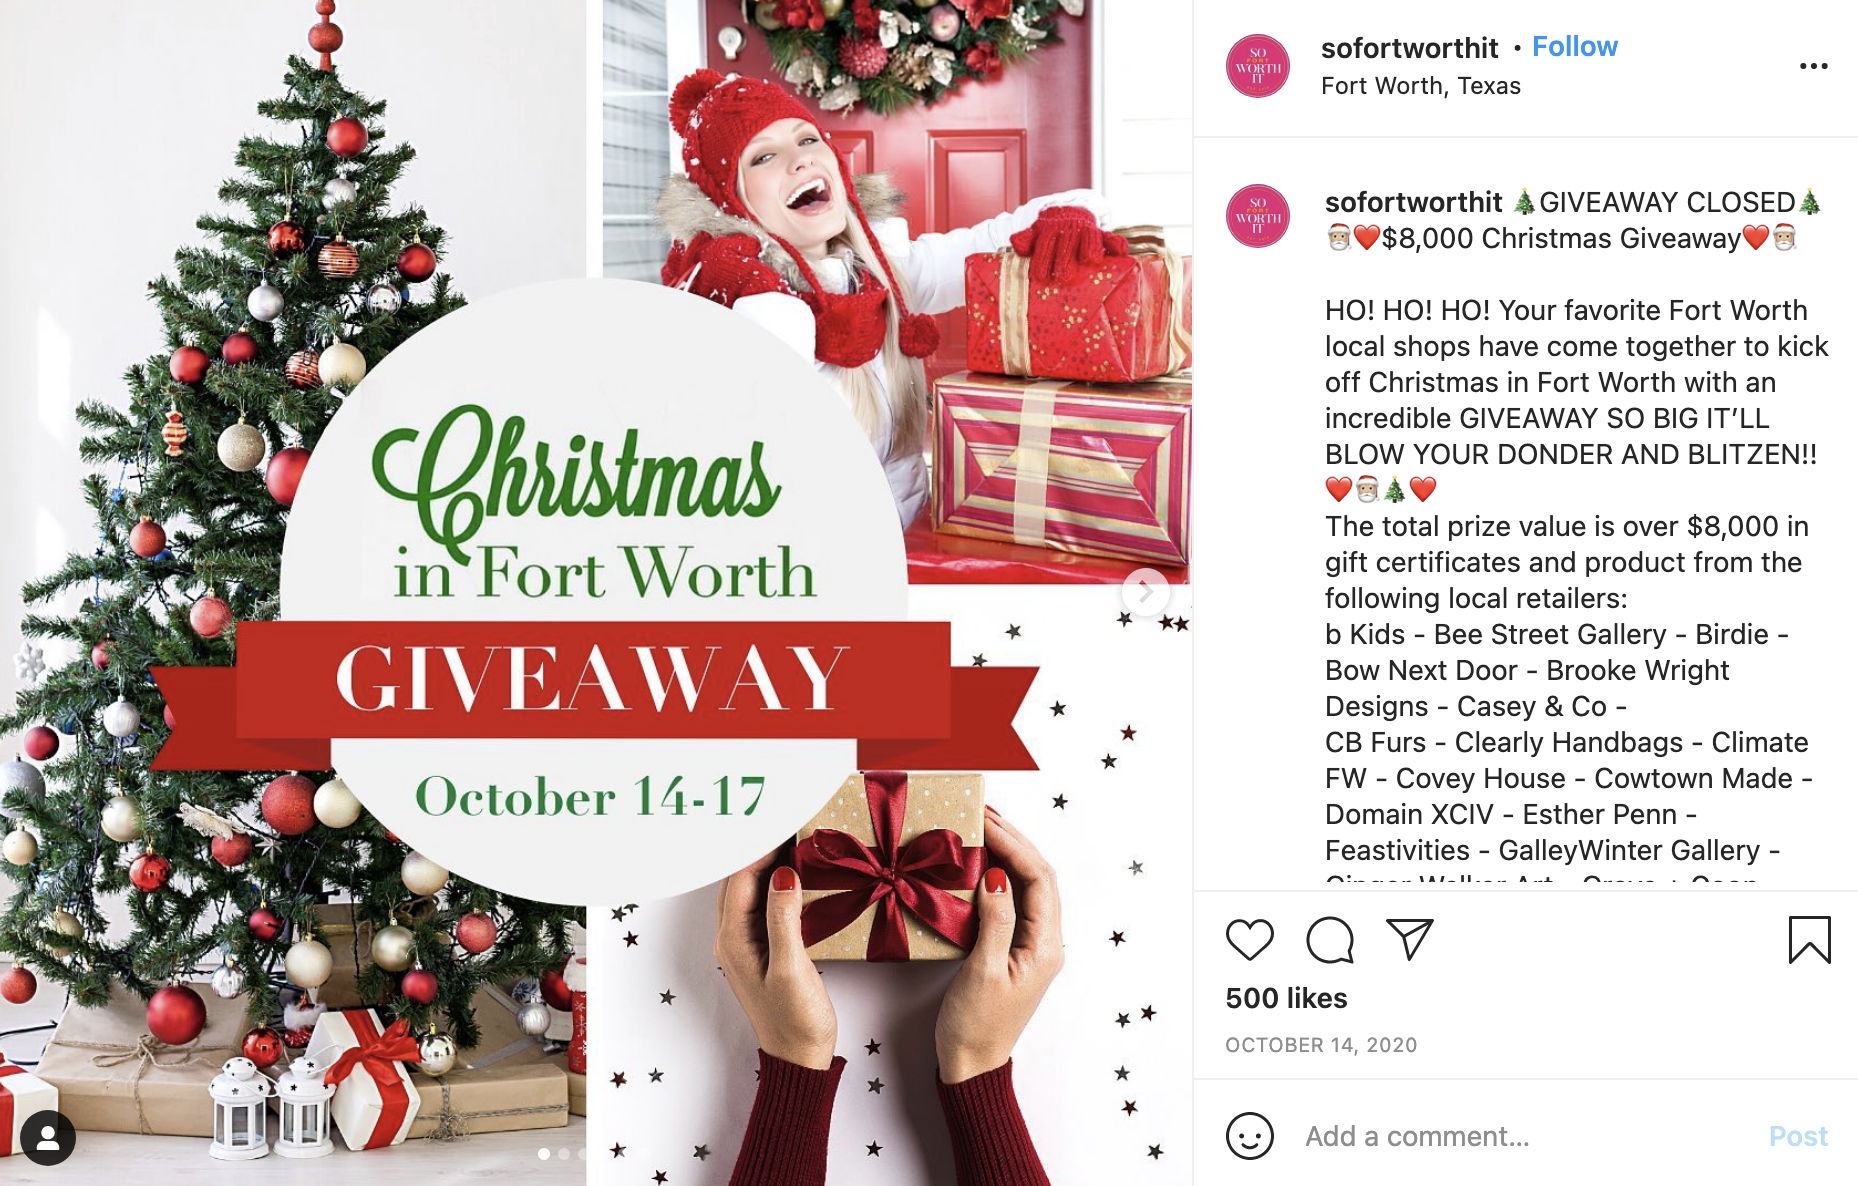 So Fort Worth It Instagram Giveaway